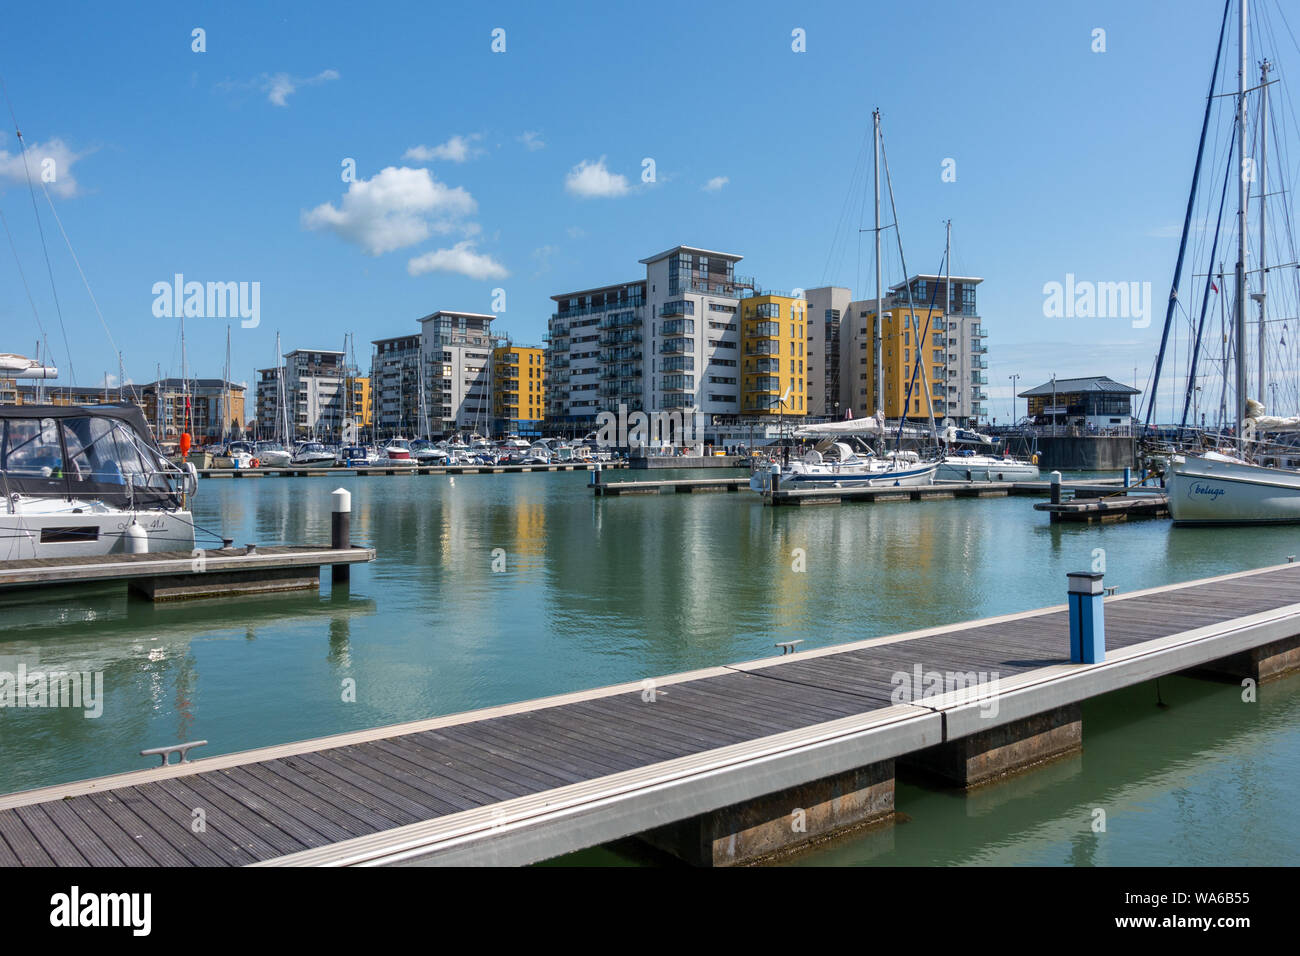 Moorings, boats and apartments, Sovereign Marina Harbour, Eastbourne, East Sussex, England,UK Stock Photo